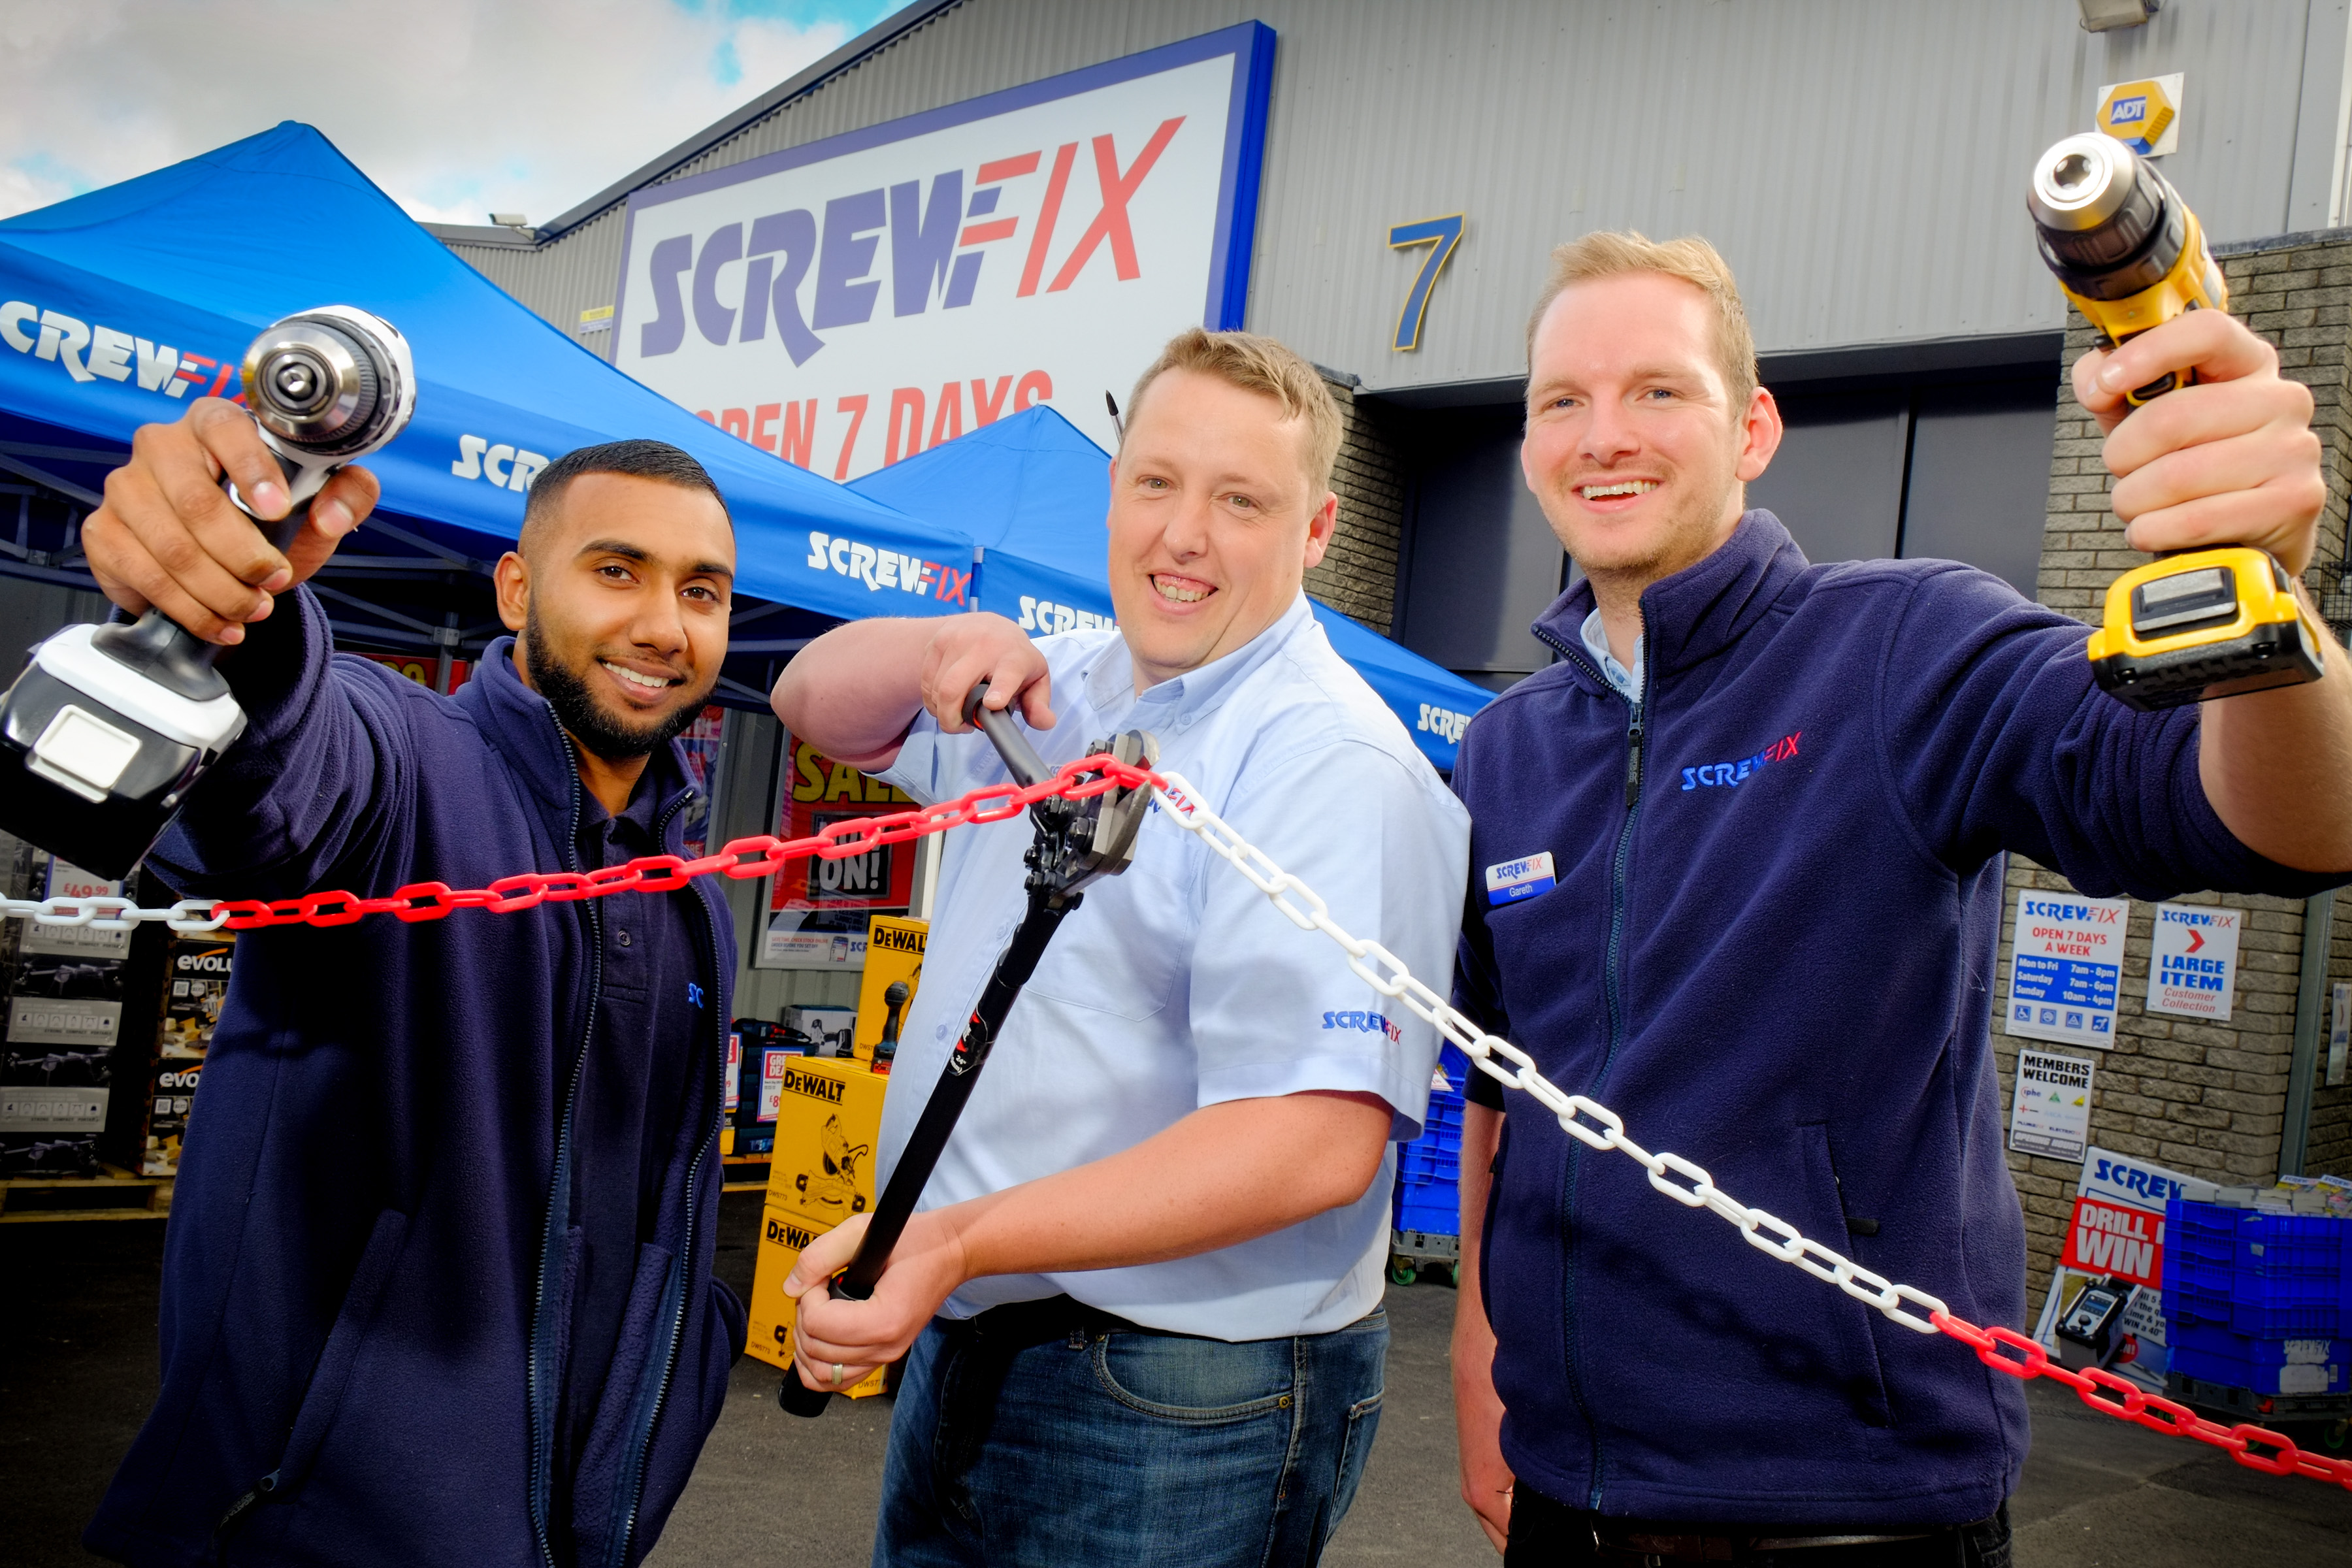 Wolverhampton’s second Screwfix store is declared a runaway success